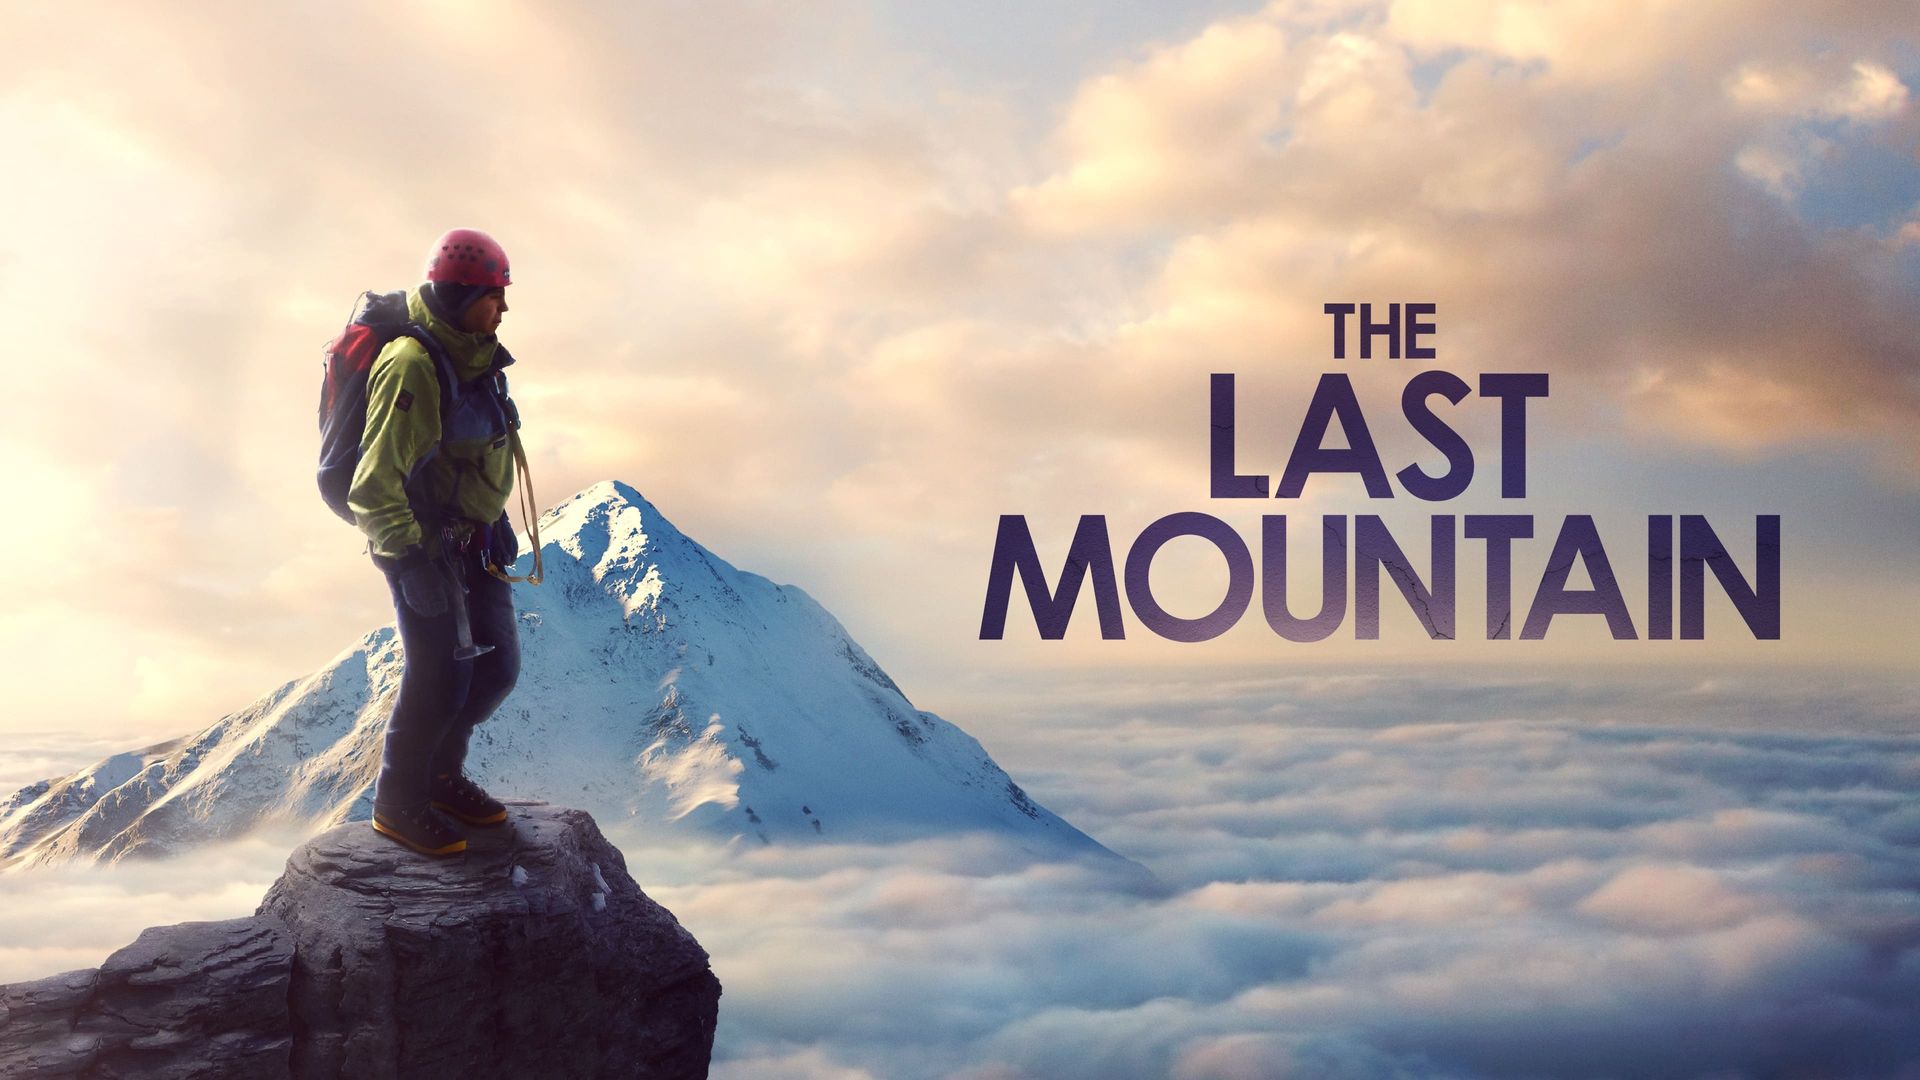 The Last Mountain background